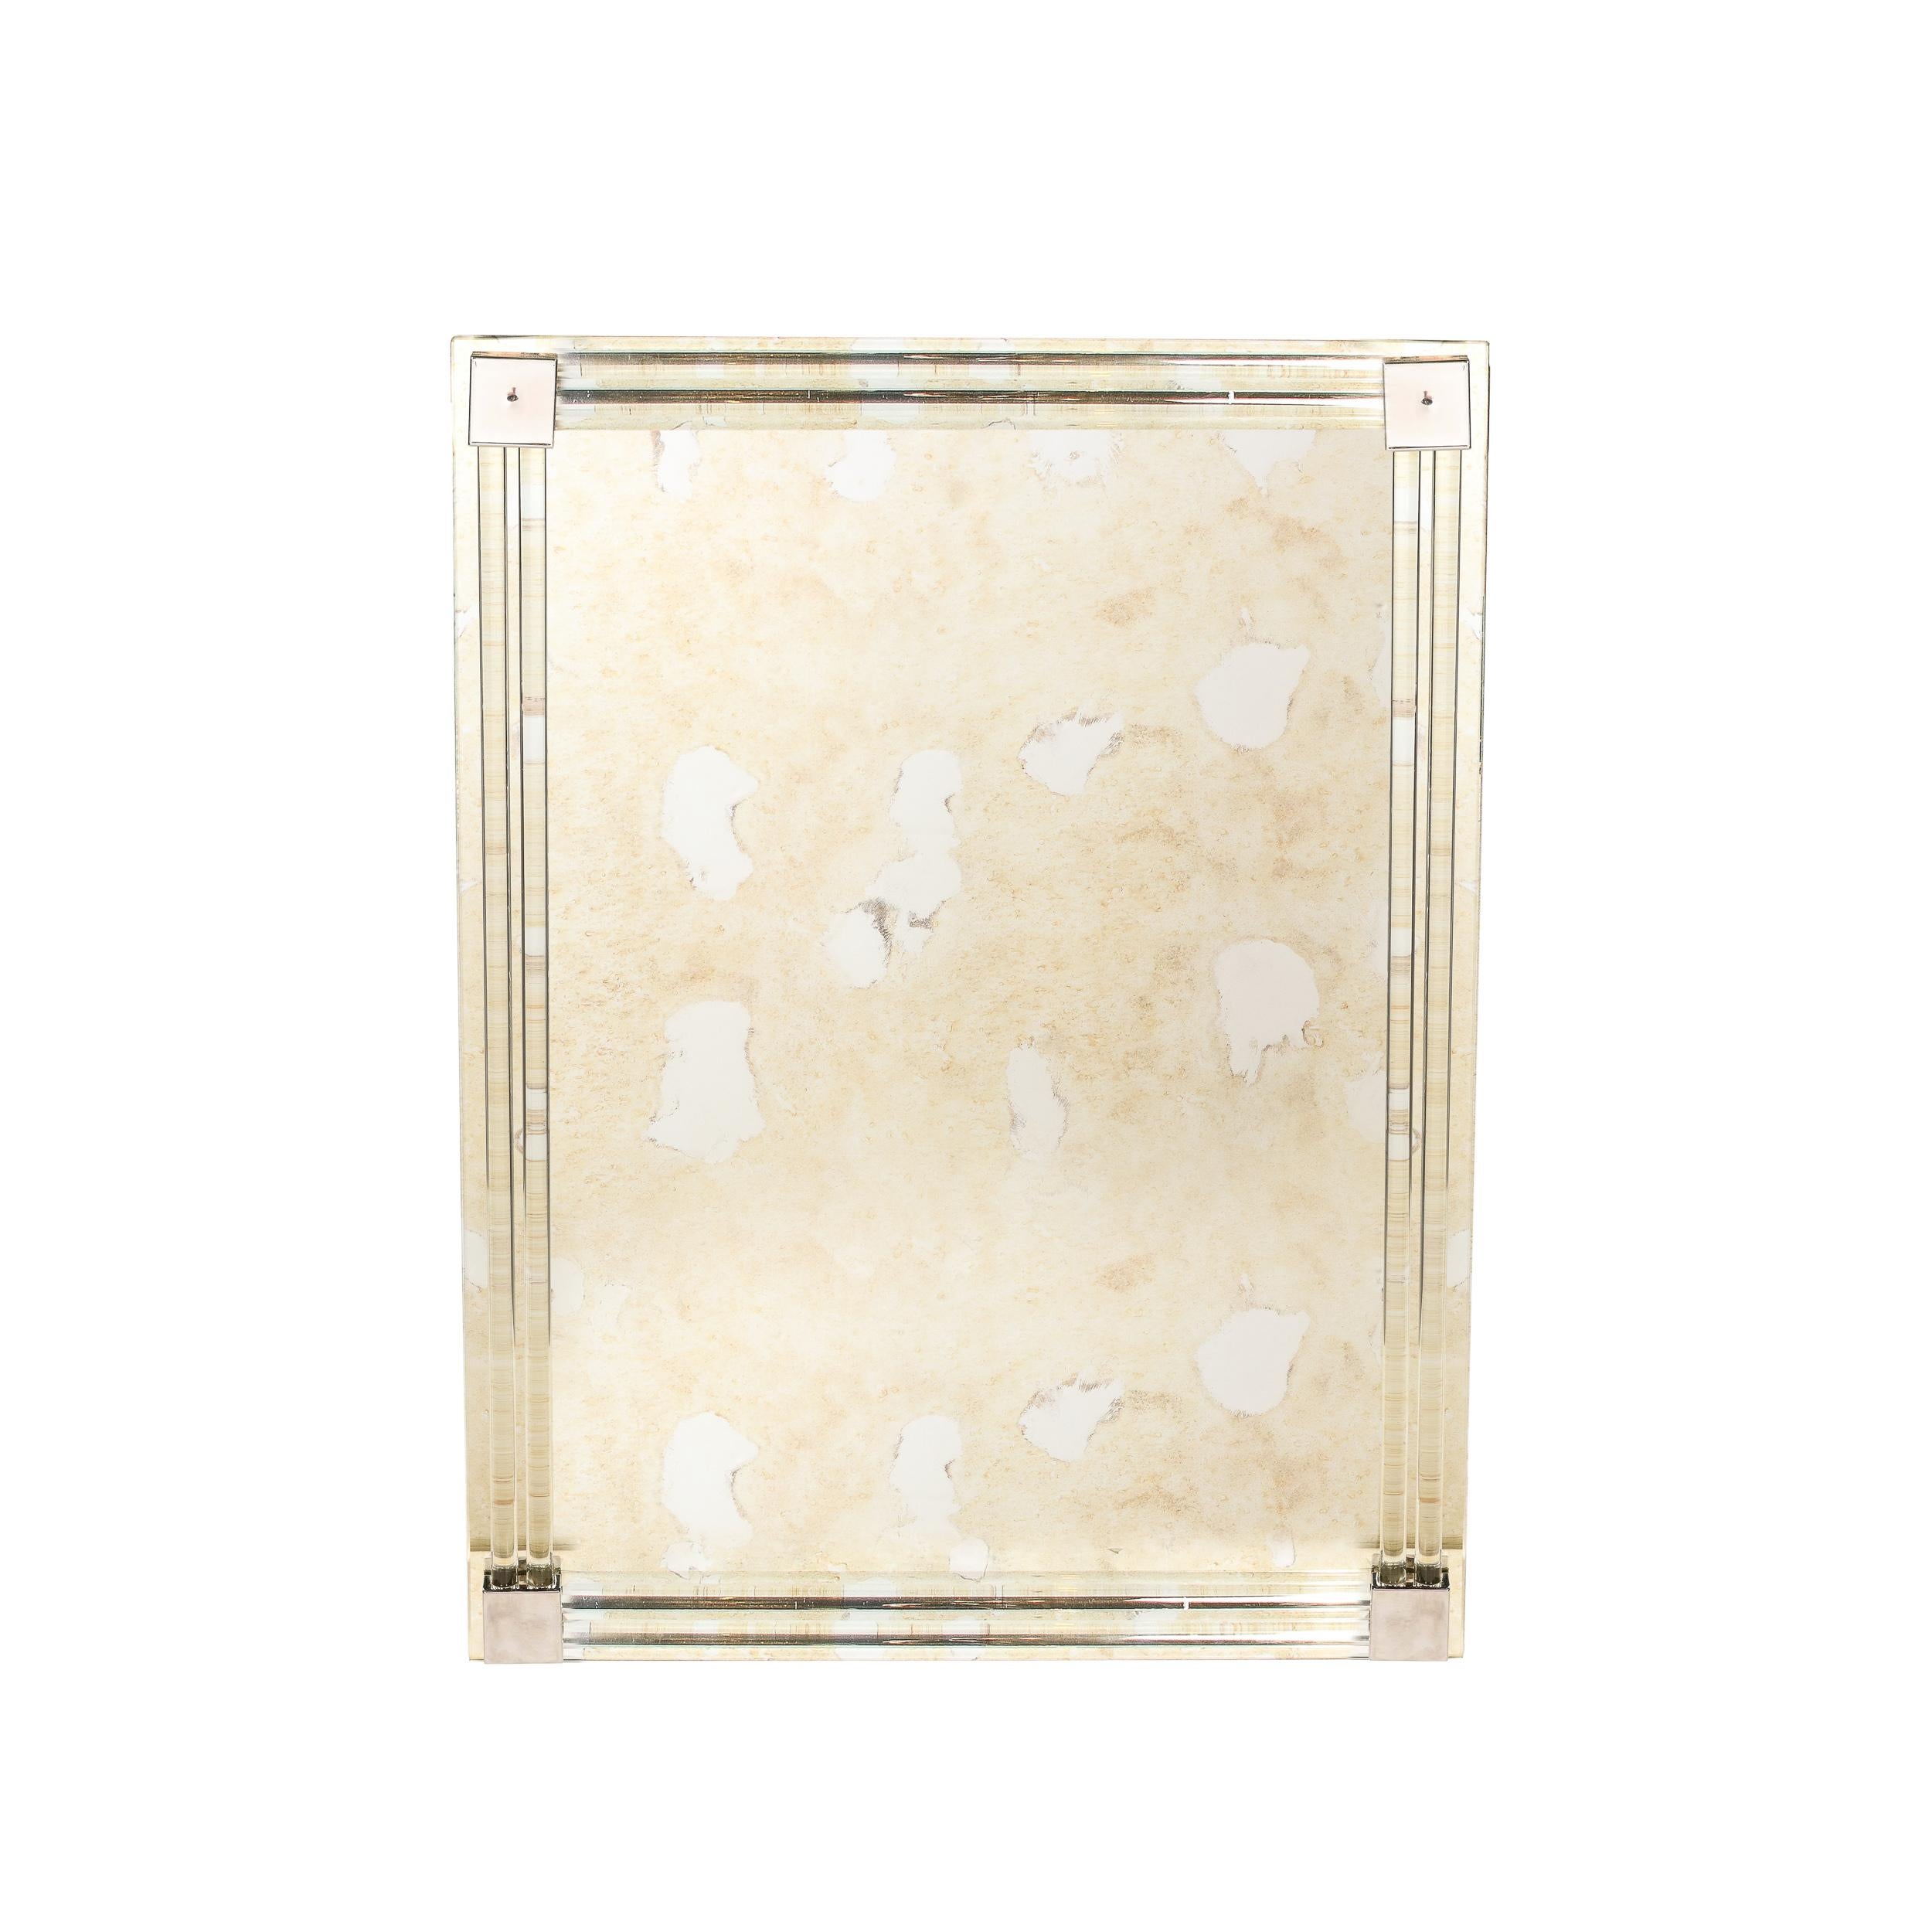 This lovely yet powerful Mid-Century Modernist Mirror originates from the United States during the latter half of the 20th Century. Featuring corners capped in rectangular nickel elements joining together the stunning glass rods circumscribing the